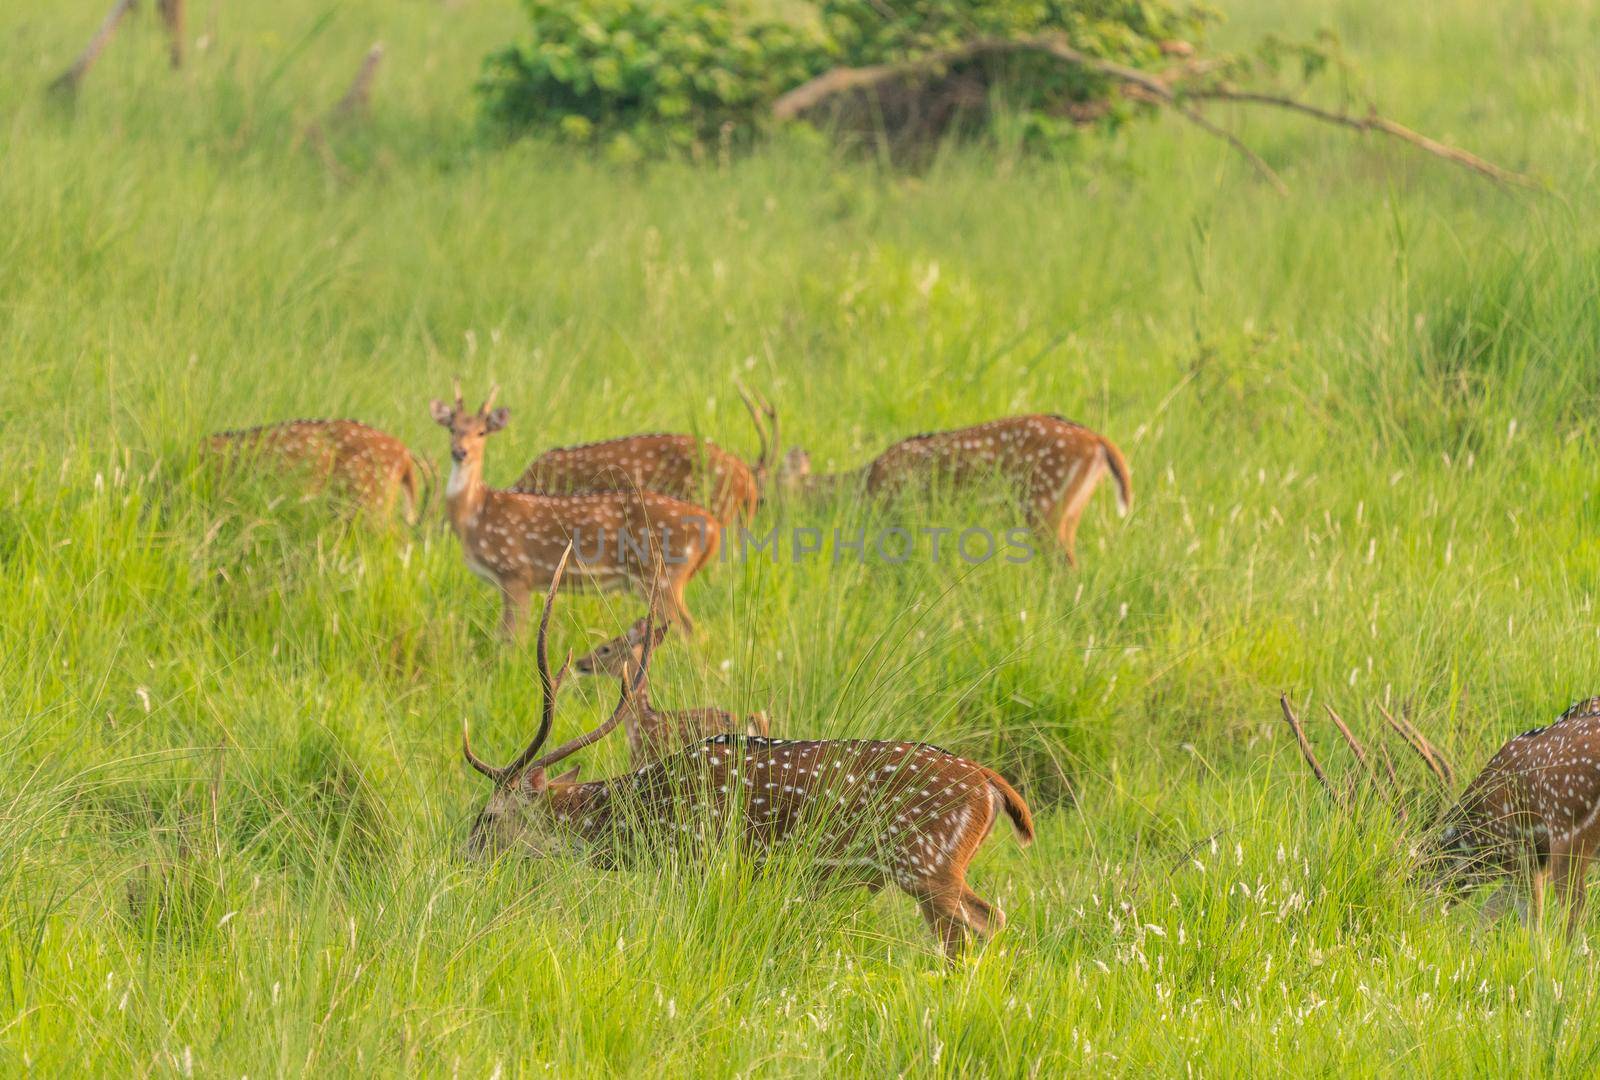 Sika or spotted deers herd in the elephant grass. Wildlife and animal photo. Japanese deer Cervus nippon